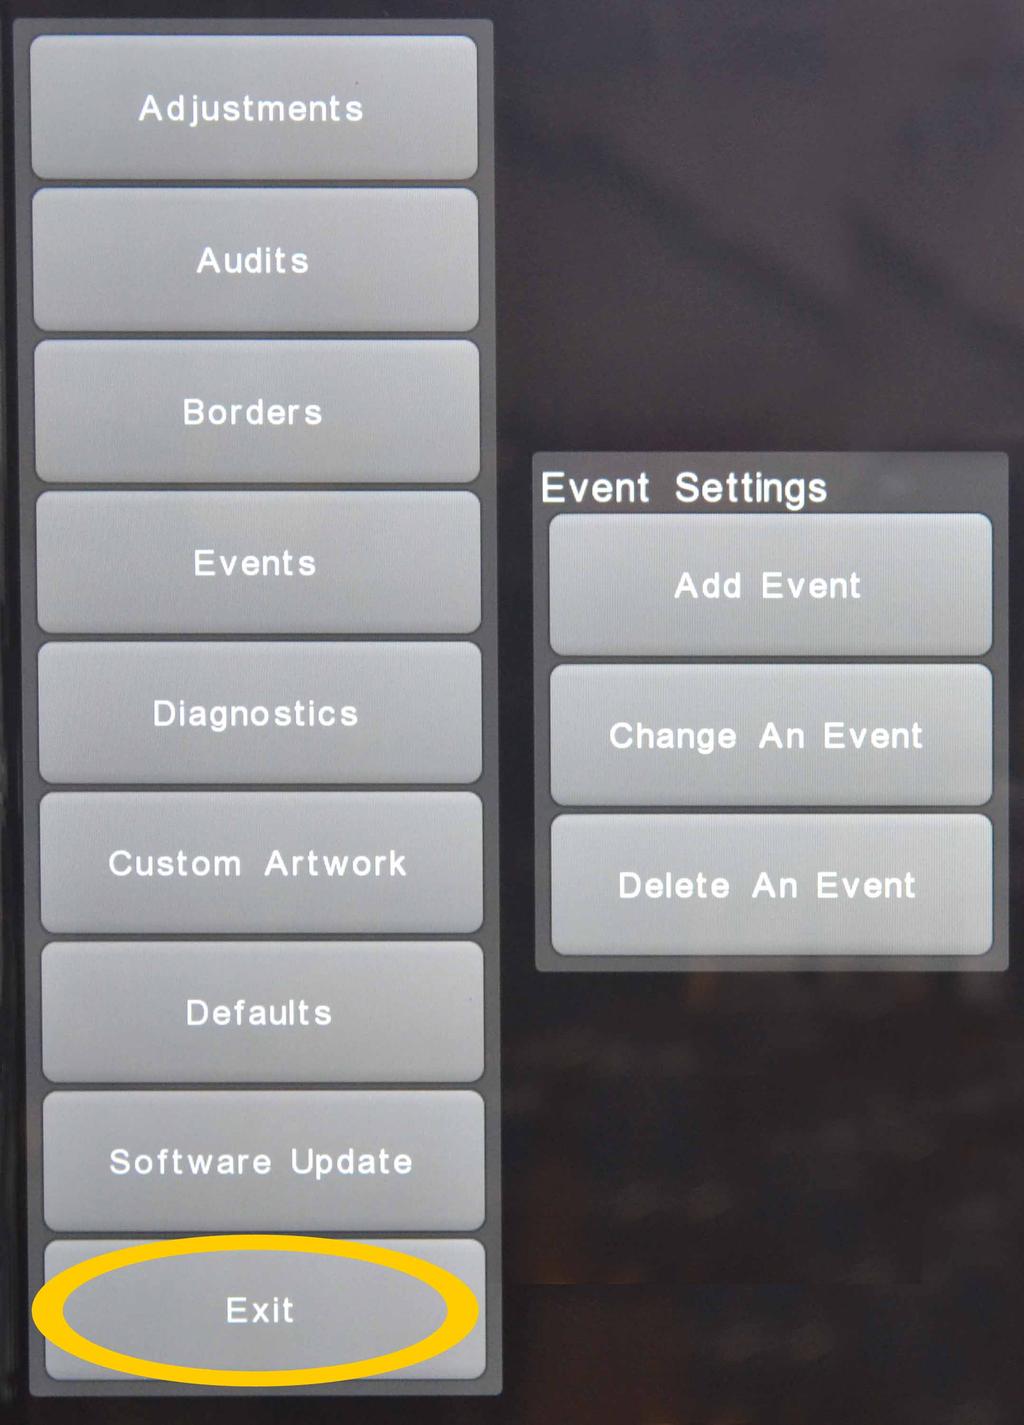 Then Exit the Service Menu. Yu can change r delete any event within 24 hurs after the event end time.